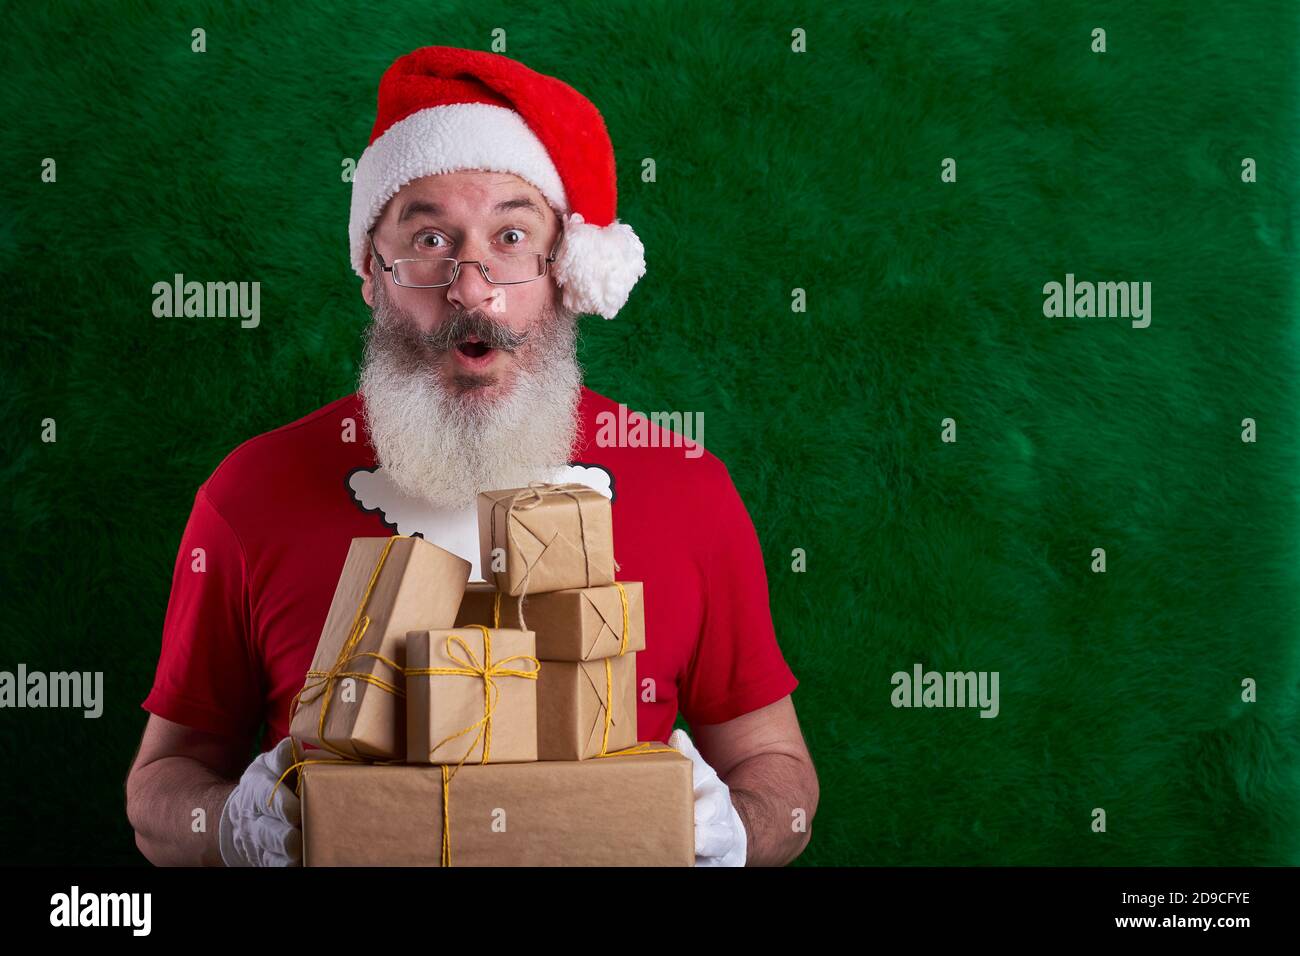 Mature bearded man wearing Santa hat with many gifts in hand, artificial Christmas tree background, copy space Stock Photo